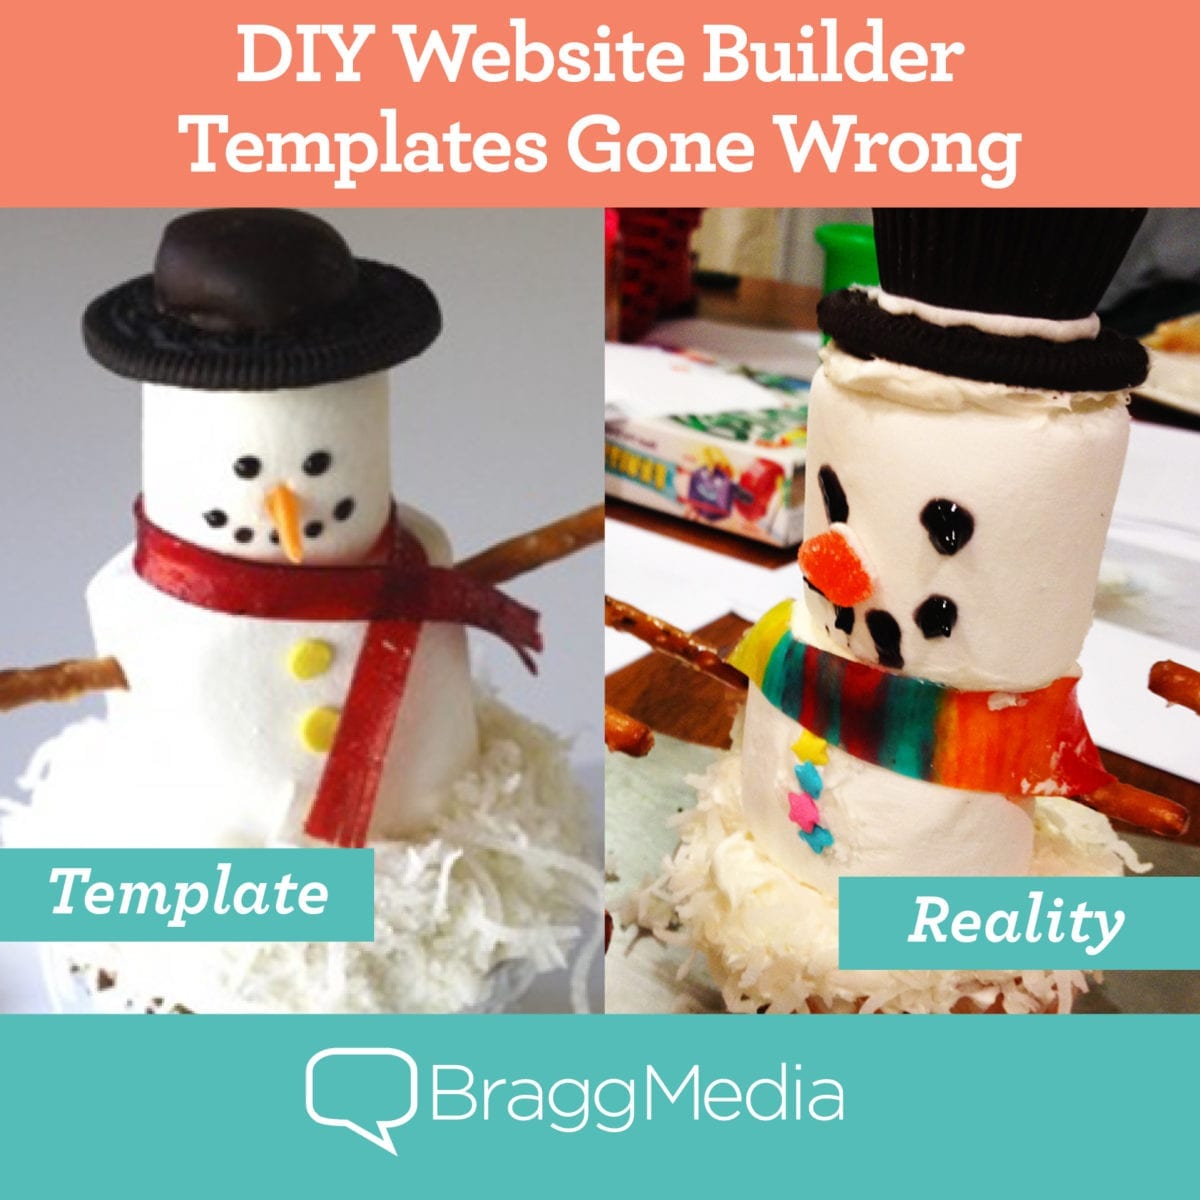 DIY website builders never look like they do on the box